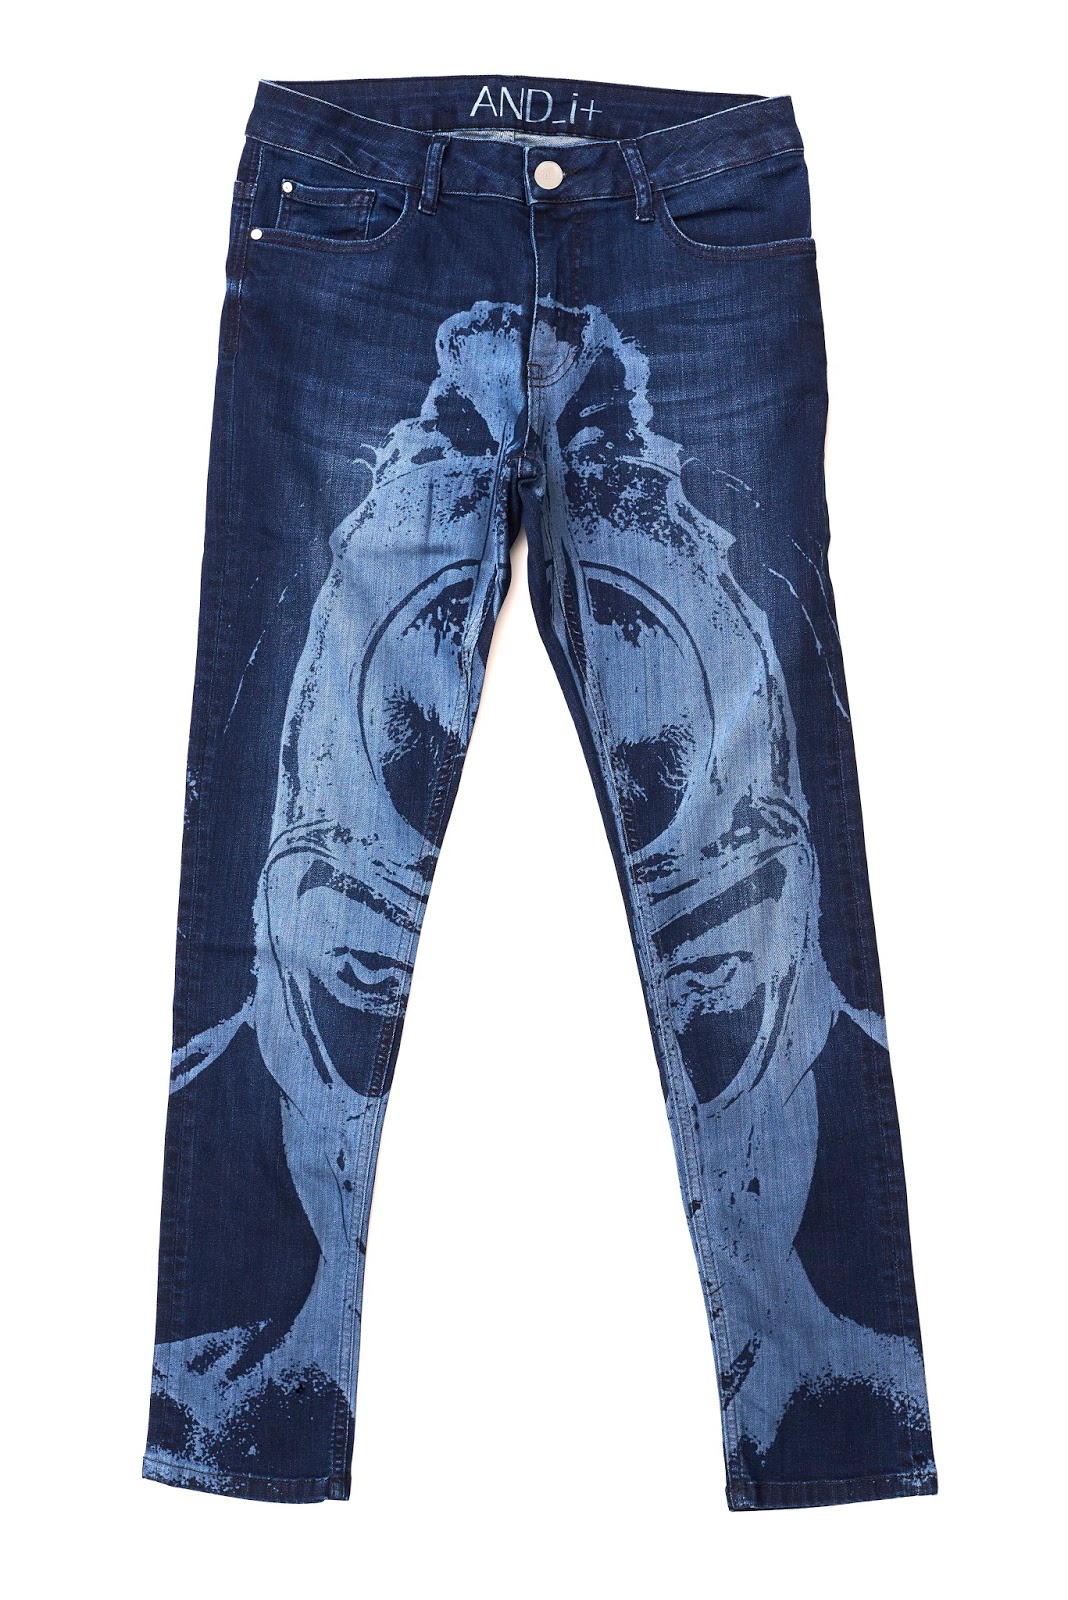 men's styling: Austrian Designer AND_i launches lasered jeans men's ...